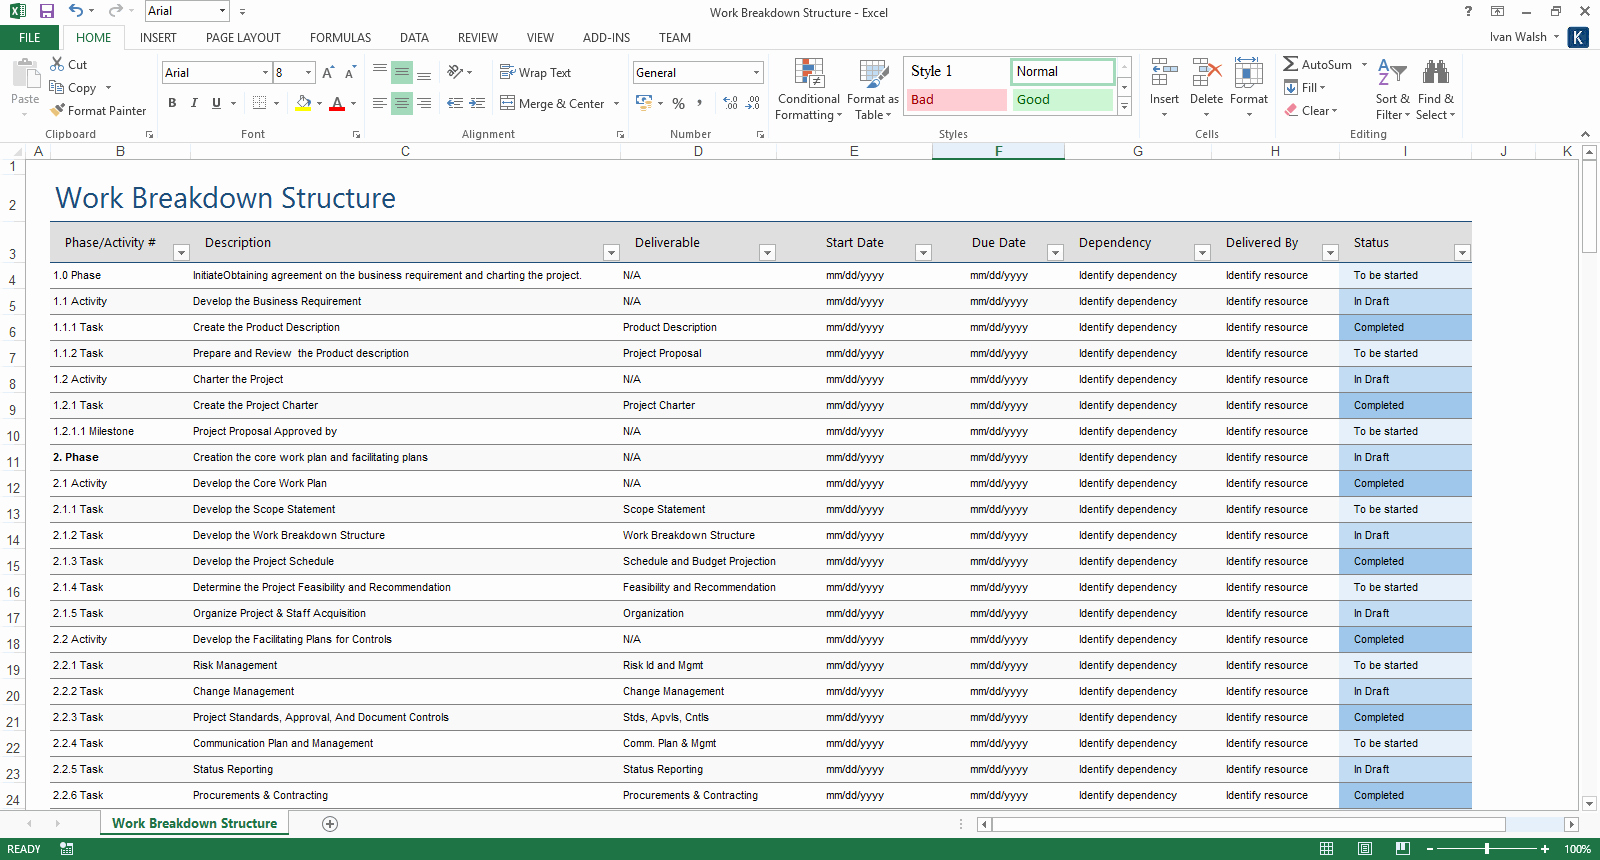 Project Plan Template – Download Ms Word &amp; Excel forms